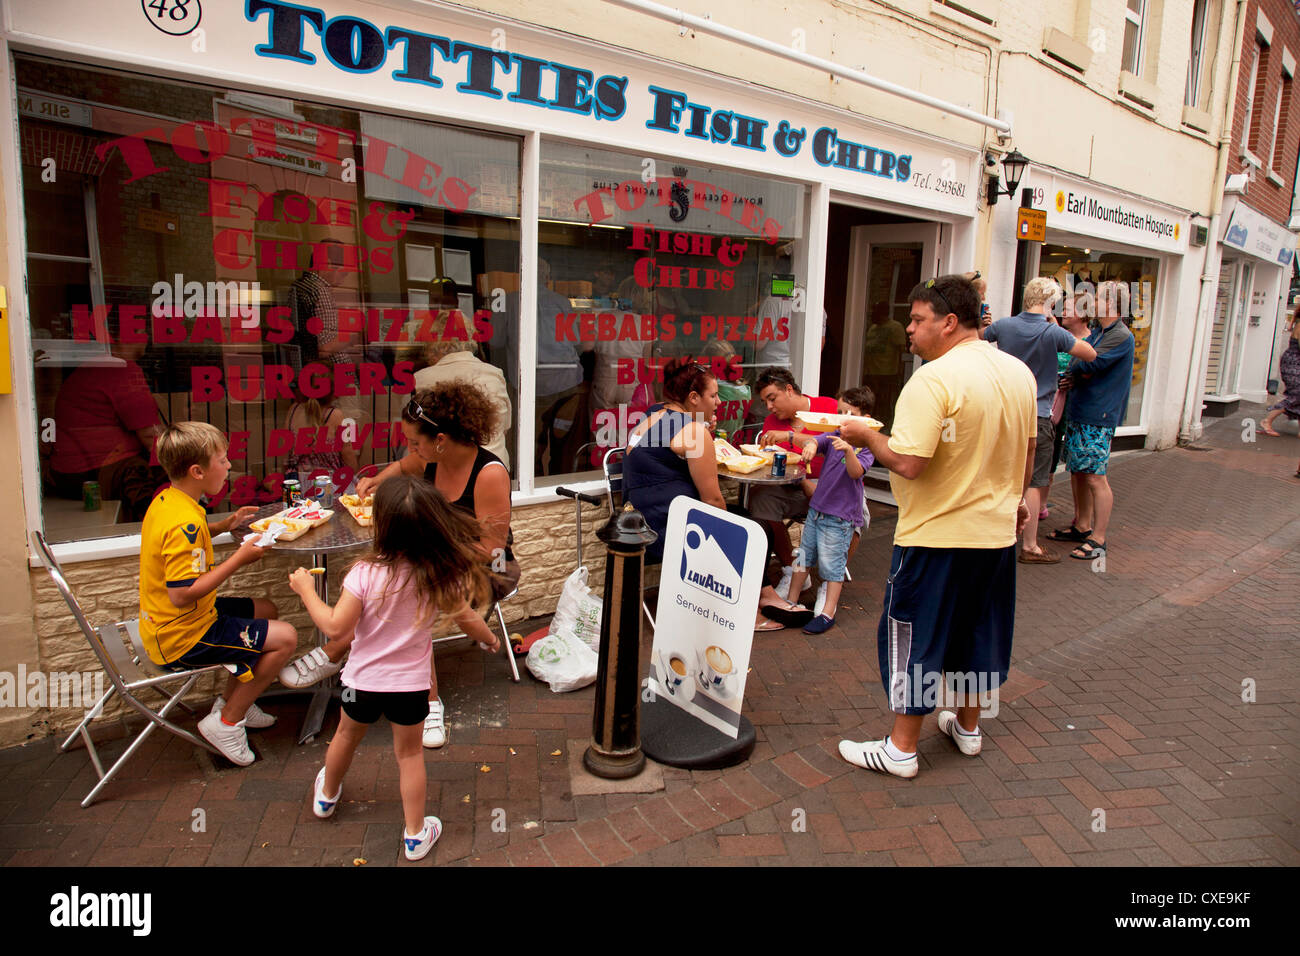 Totties Fish and Chip shop. Cowes is an English seaport town on the Isle of Wight, UK. Stock Photo